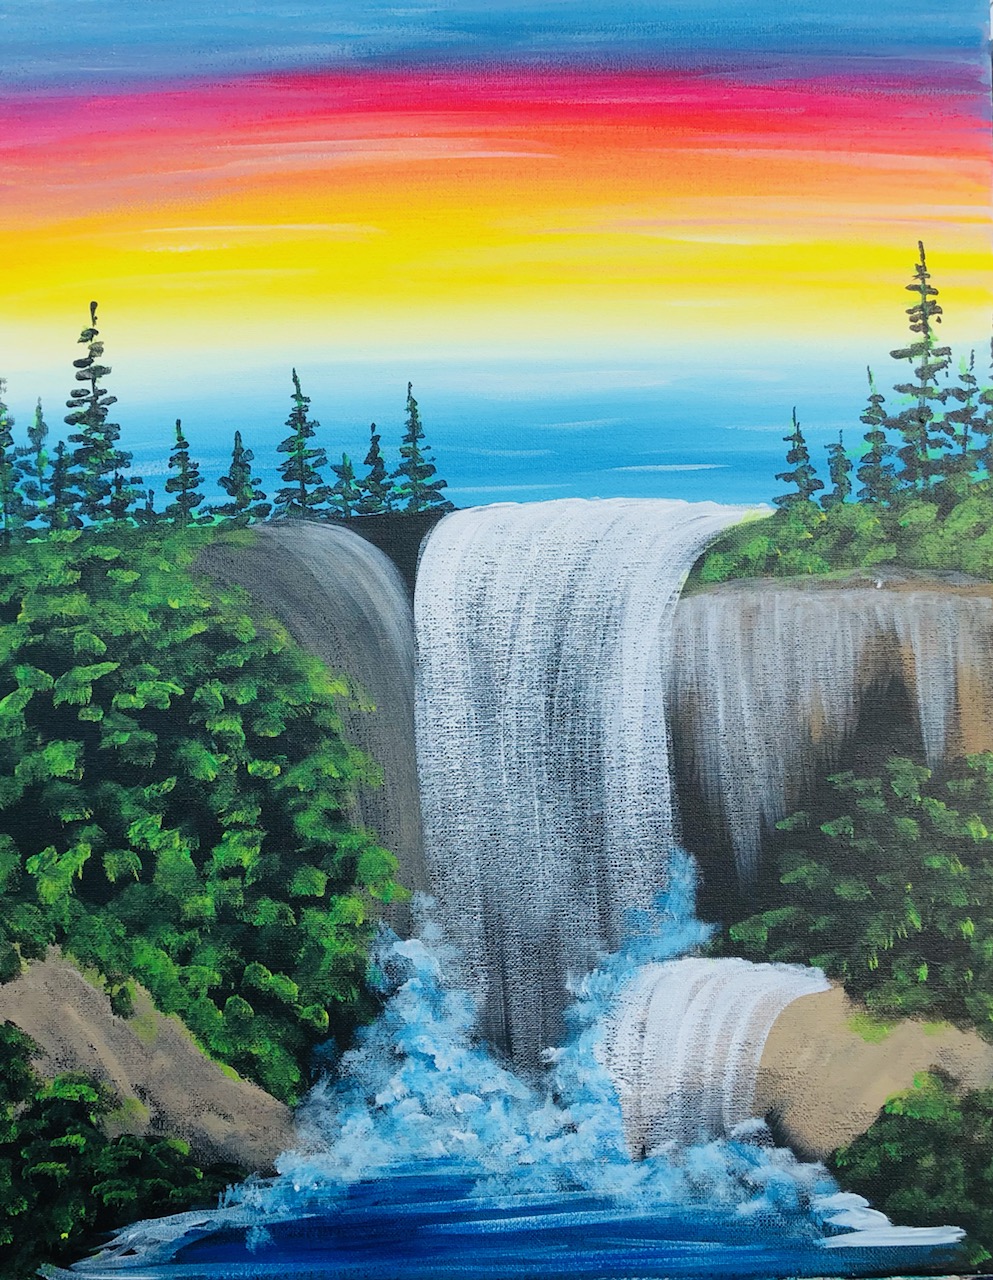 waterfall with a rainbow sky and trees around it